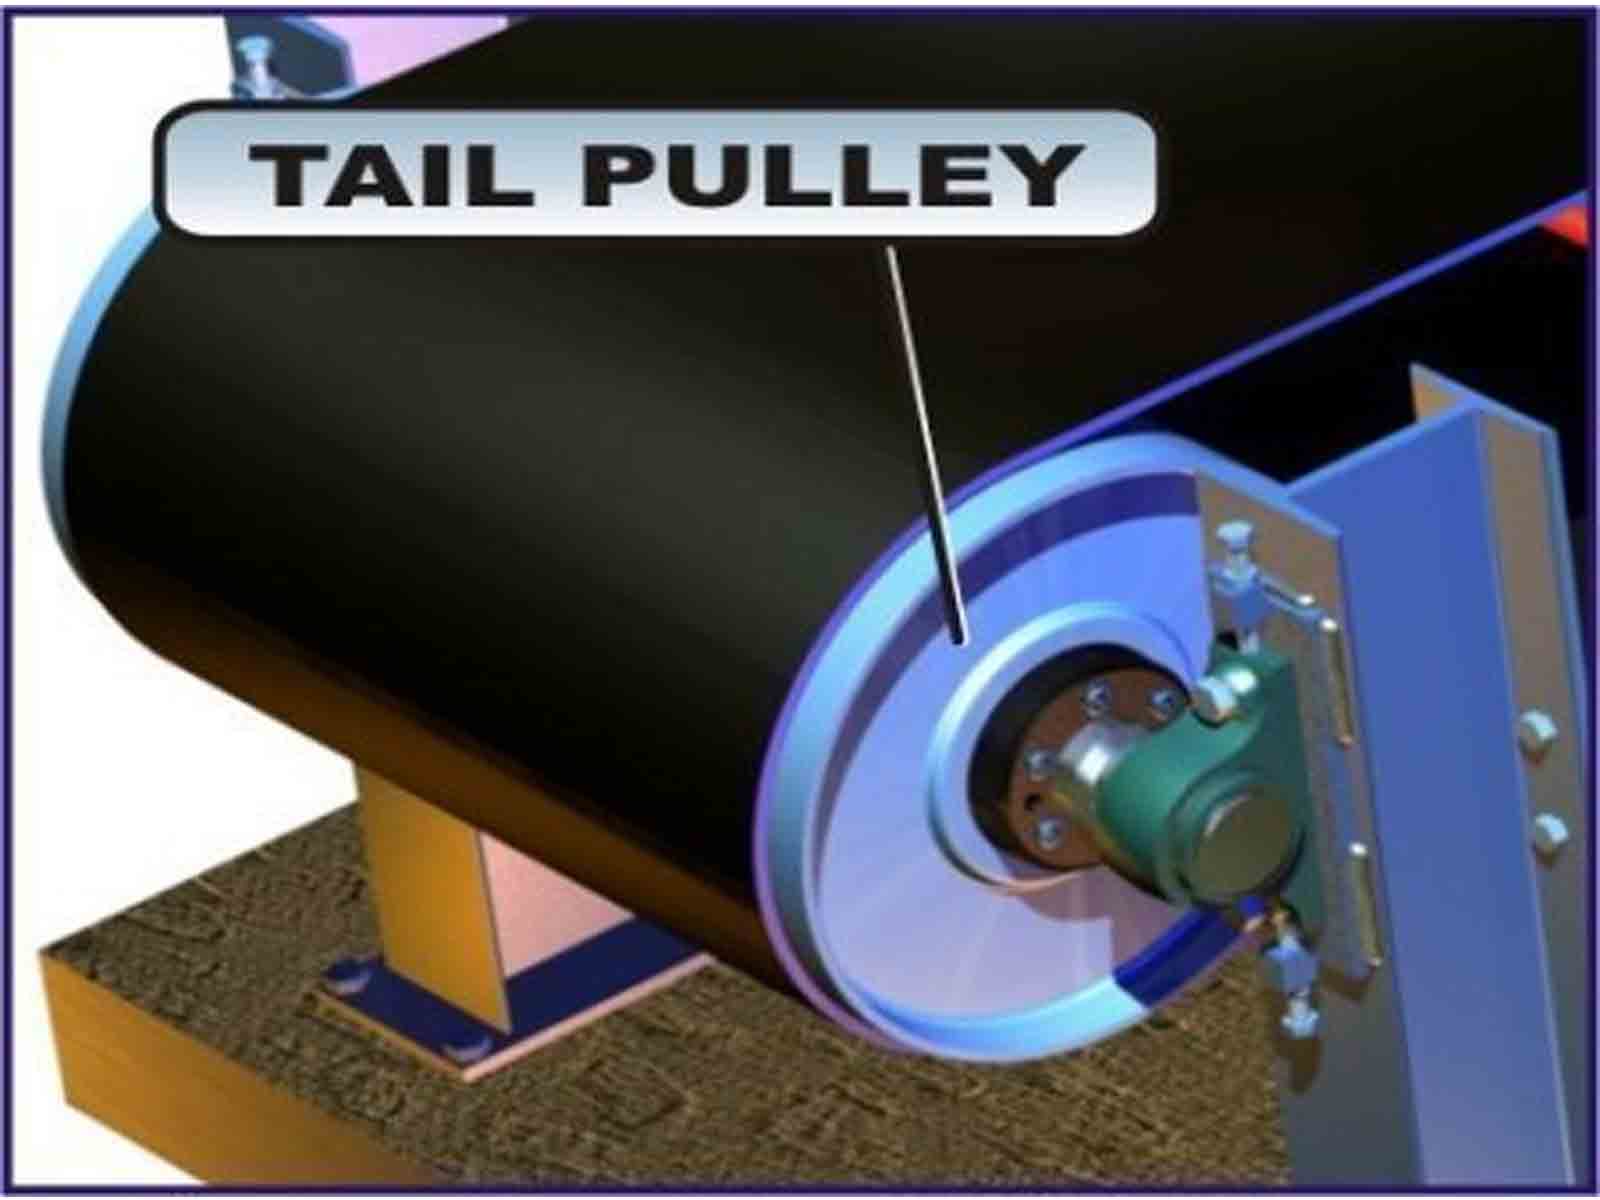 Pully Tail